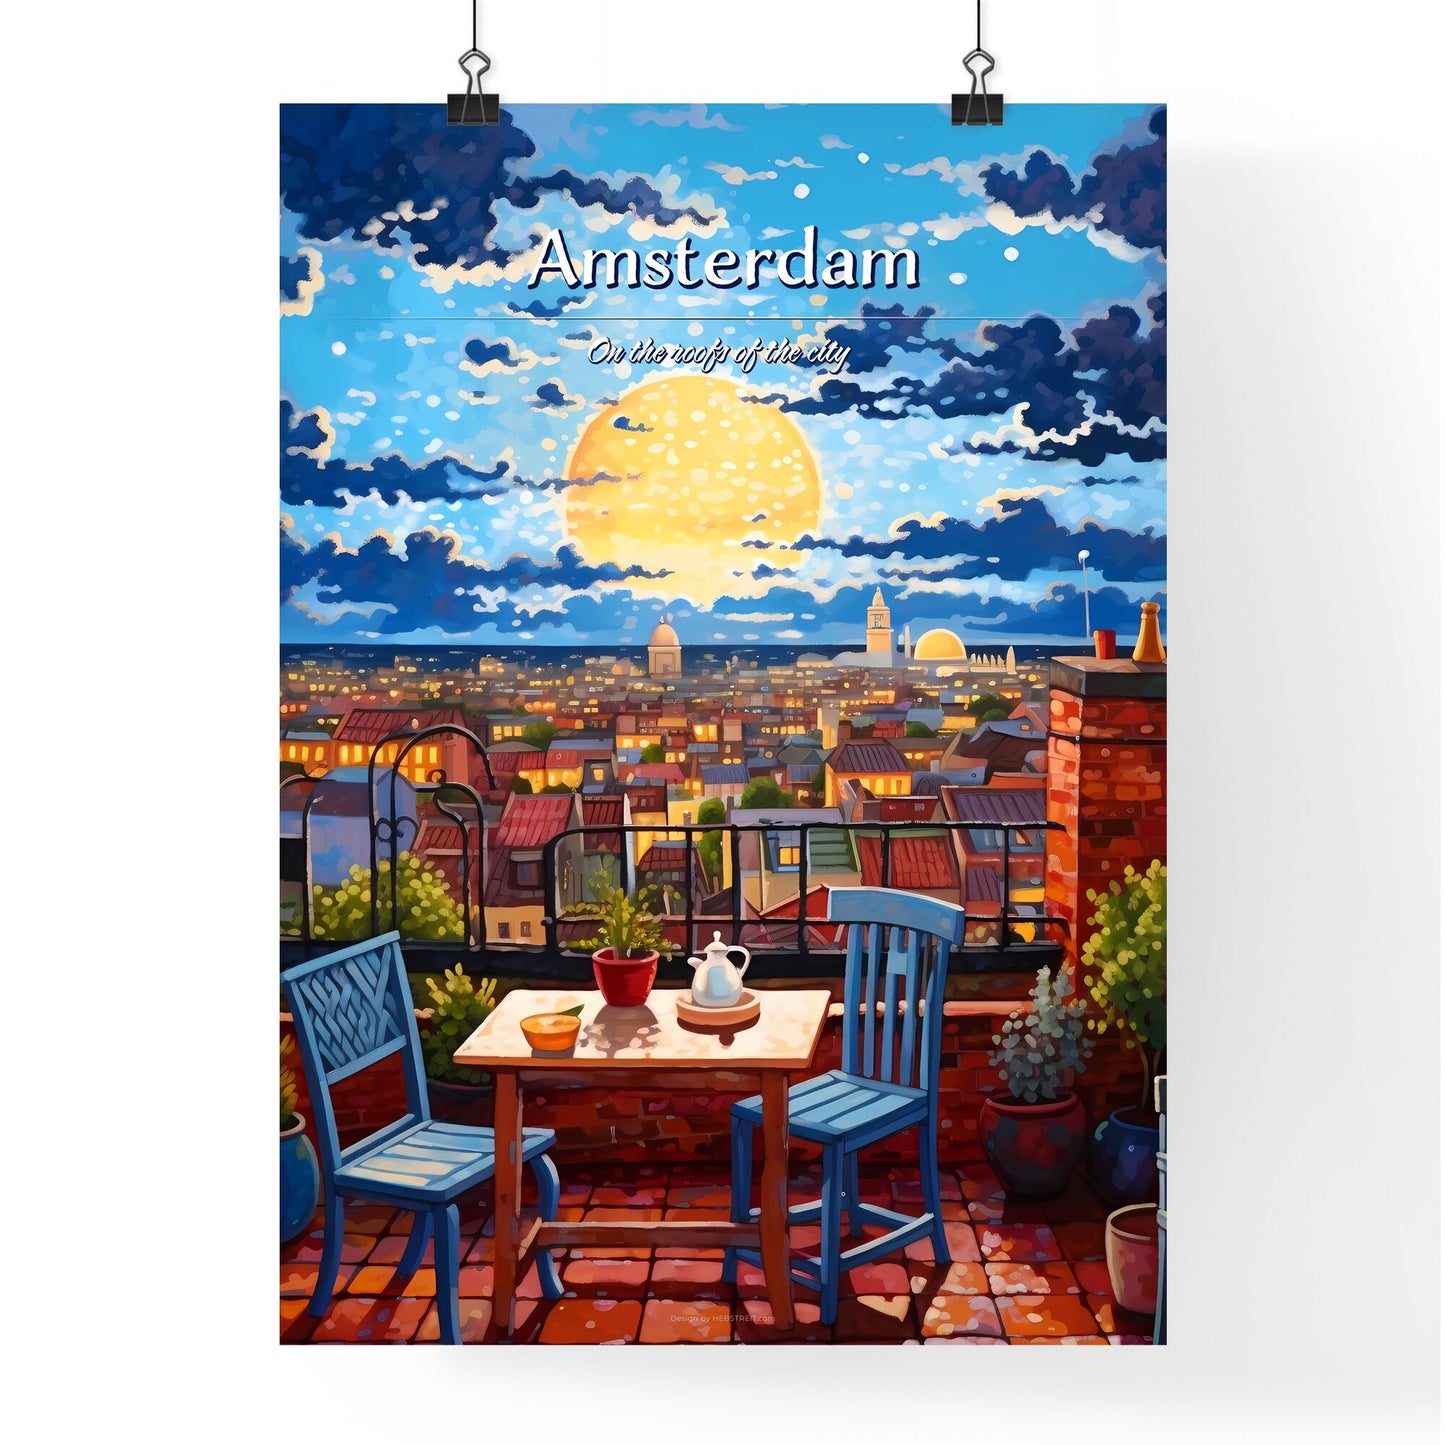 On the roofs of Amsterdam - Art print of a painting of a rooftop terrace with a table and chairs and a full moon in the sky Default Title